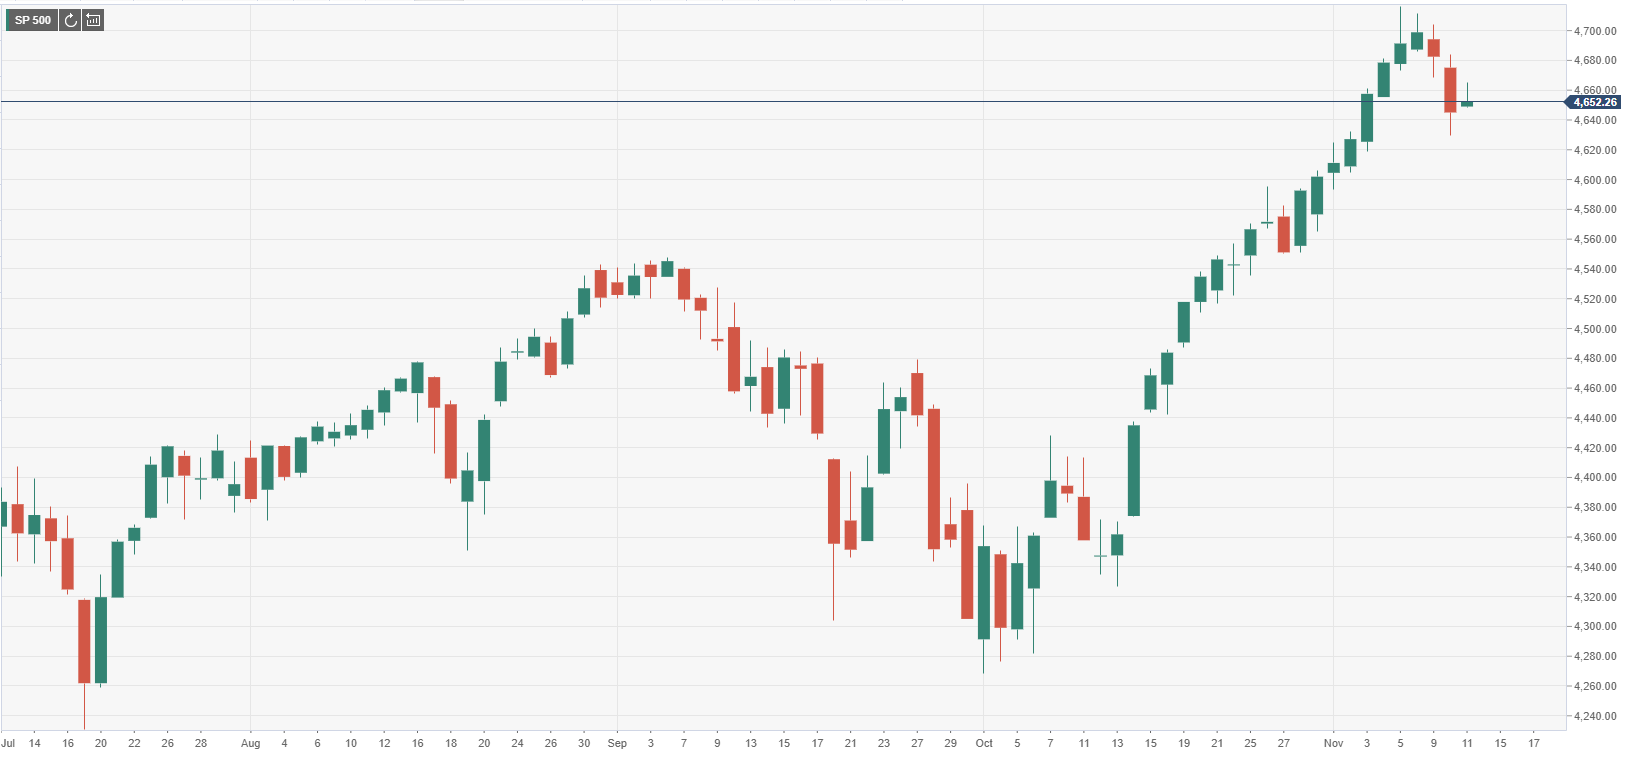 S&P 500 Index opens modestly higher after Wednesday’s slide